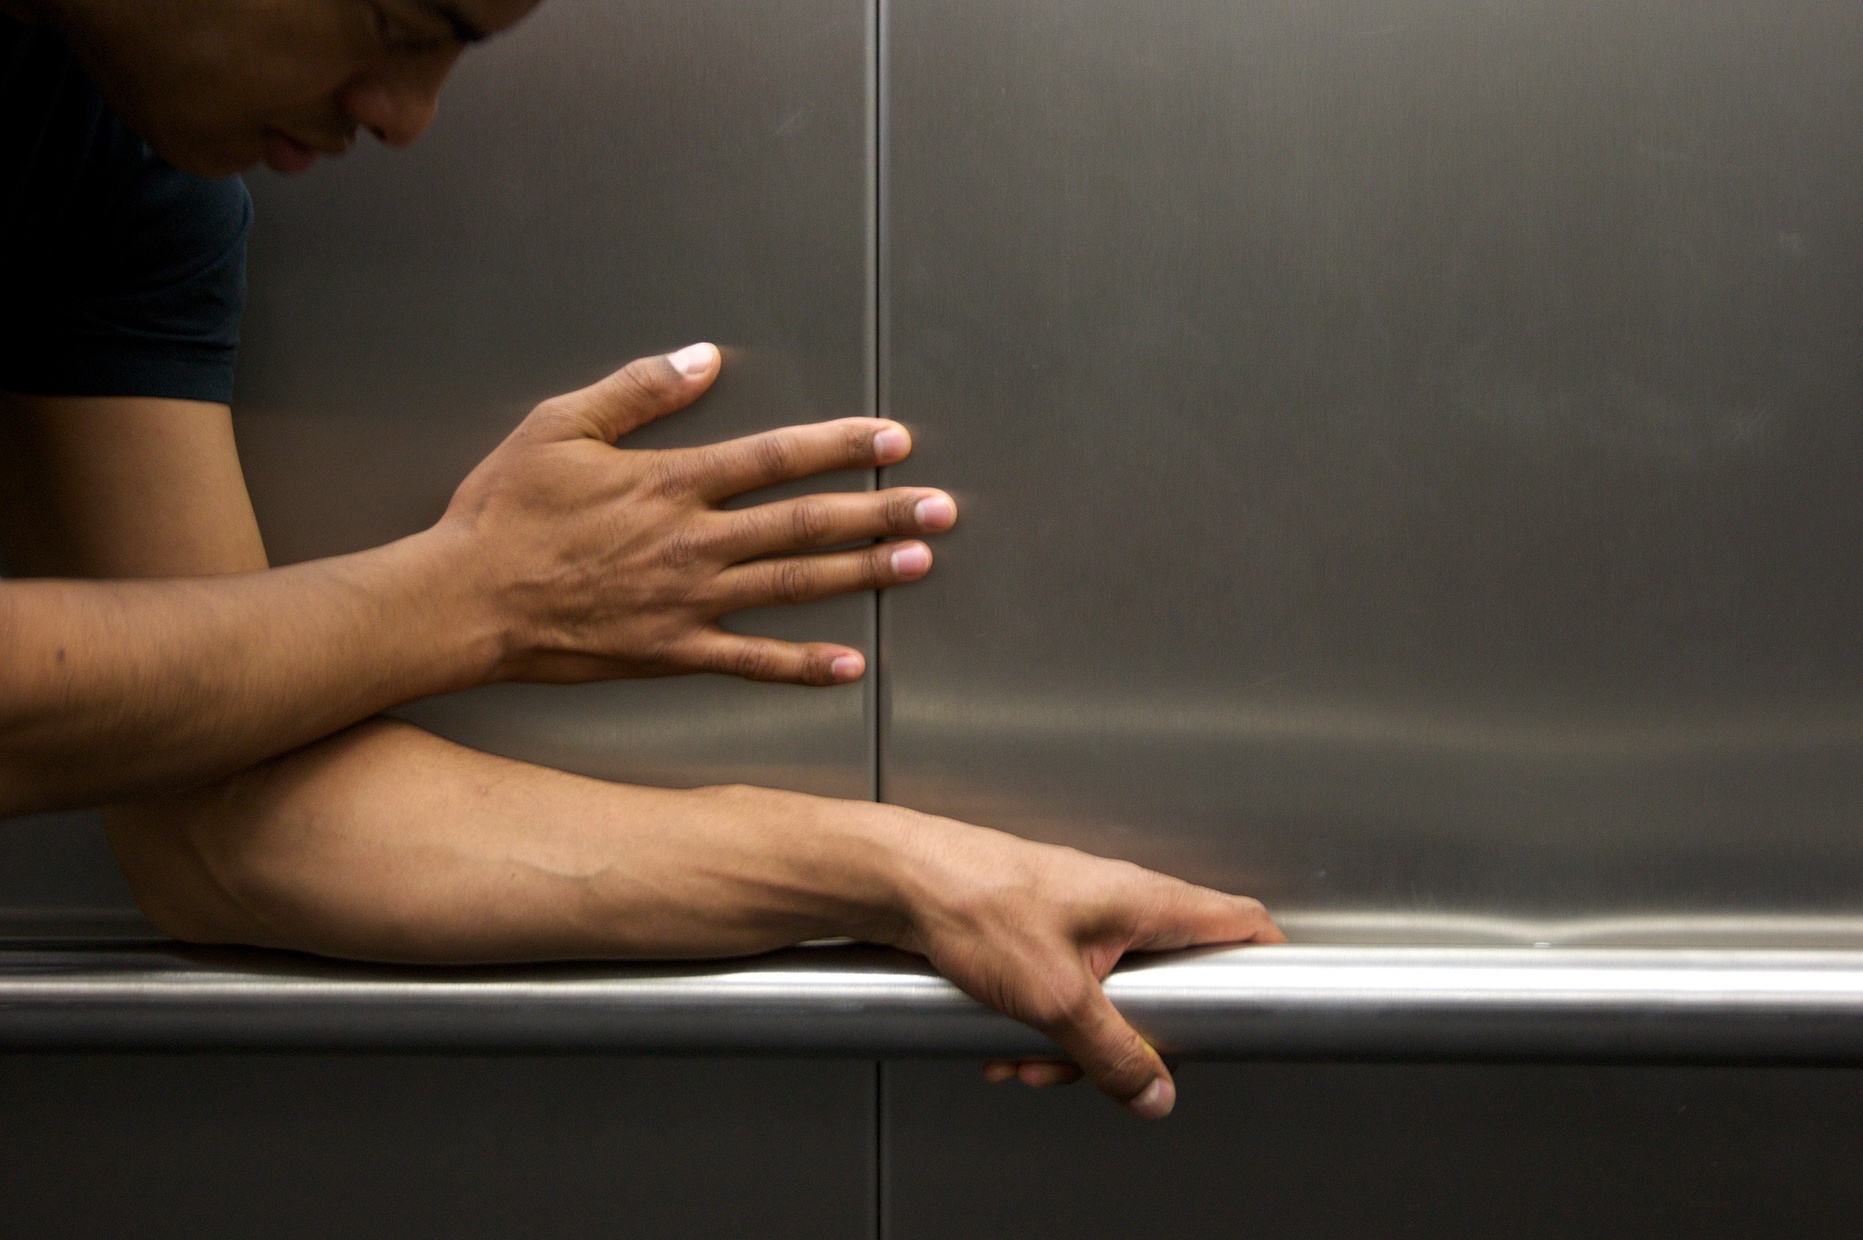 A tanned man holds onto a silver bar and feels his way along a metal wall.